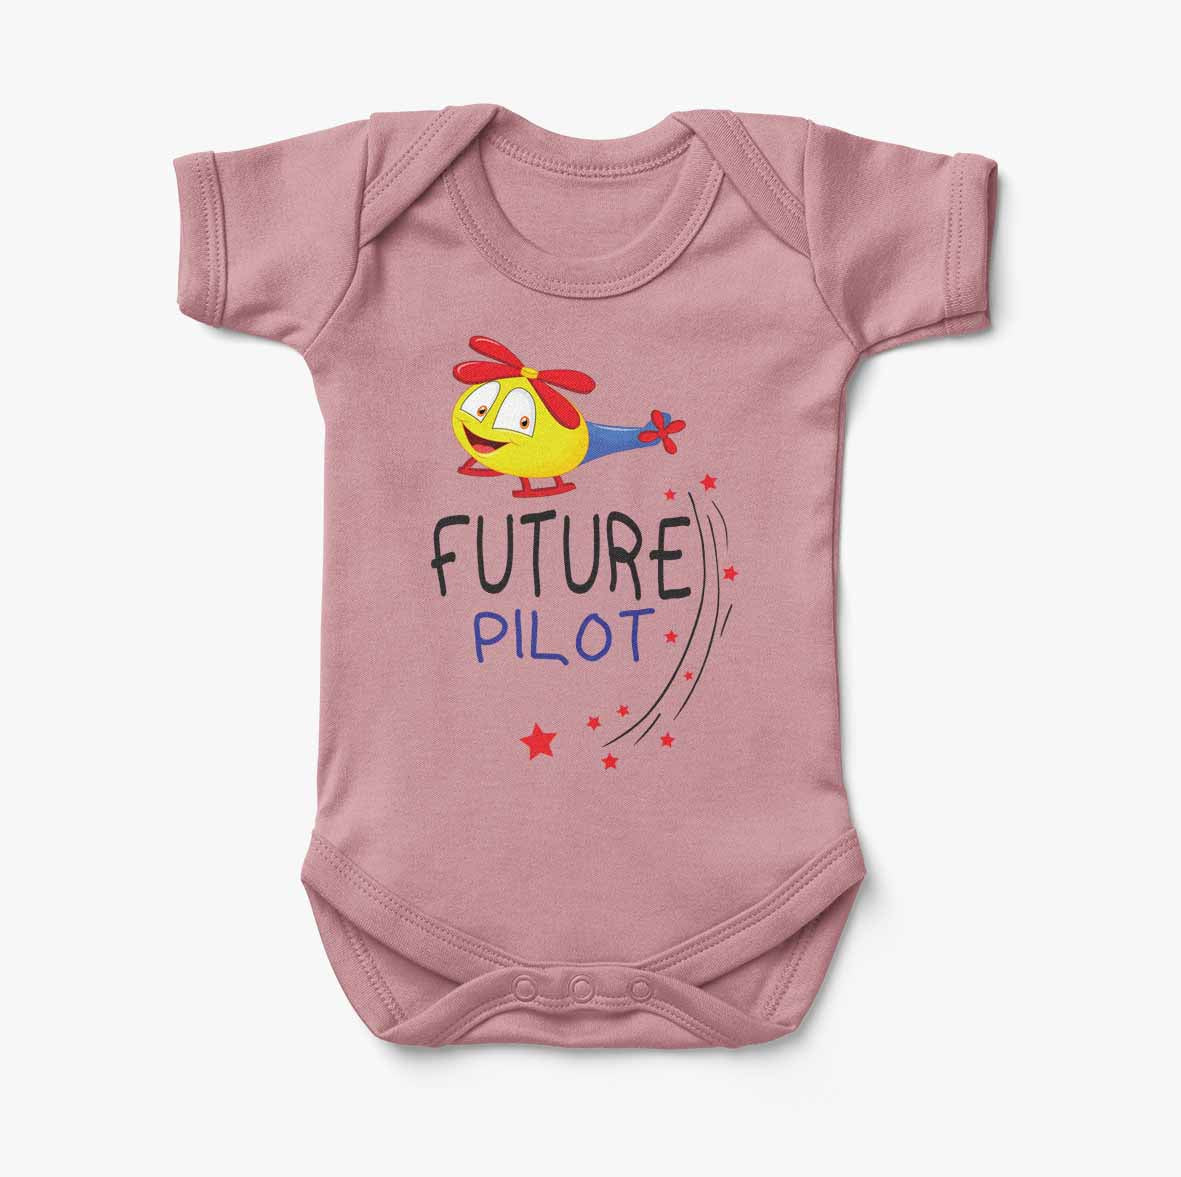 Future Pilot (Helicopter) Designed Baby Bodysuits